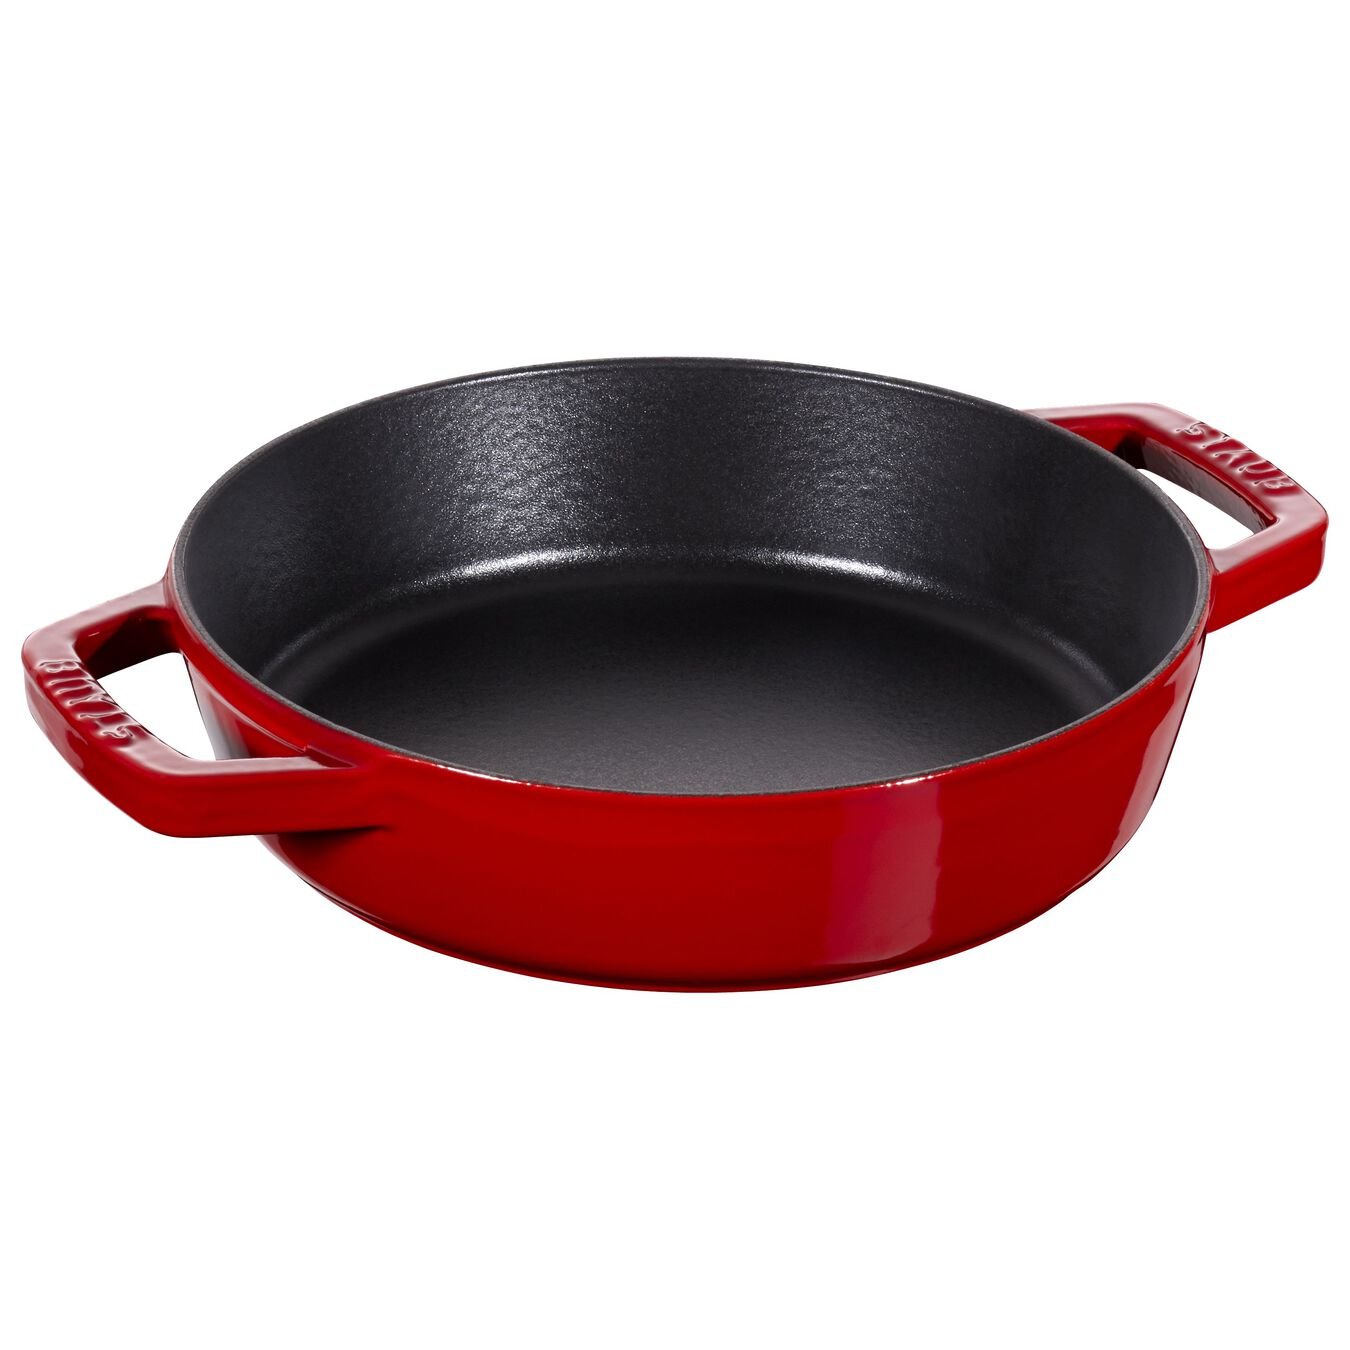 Staub – Cast Iron – Frying Pan - Double Handle - Red - 8"